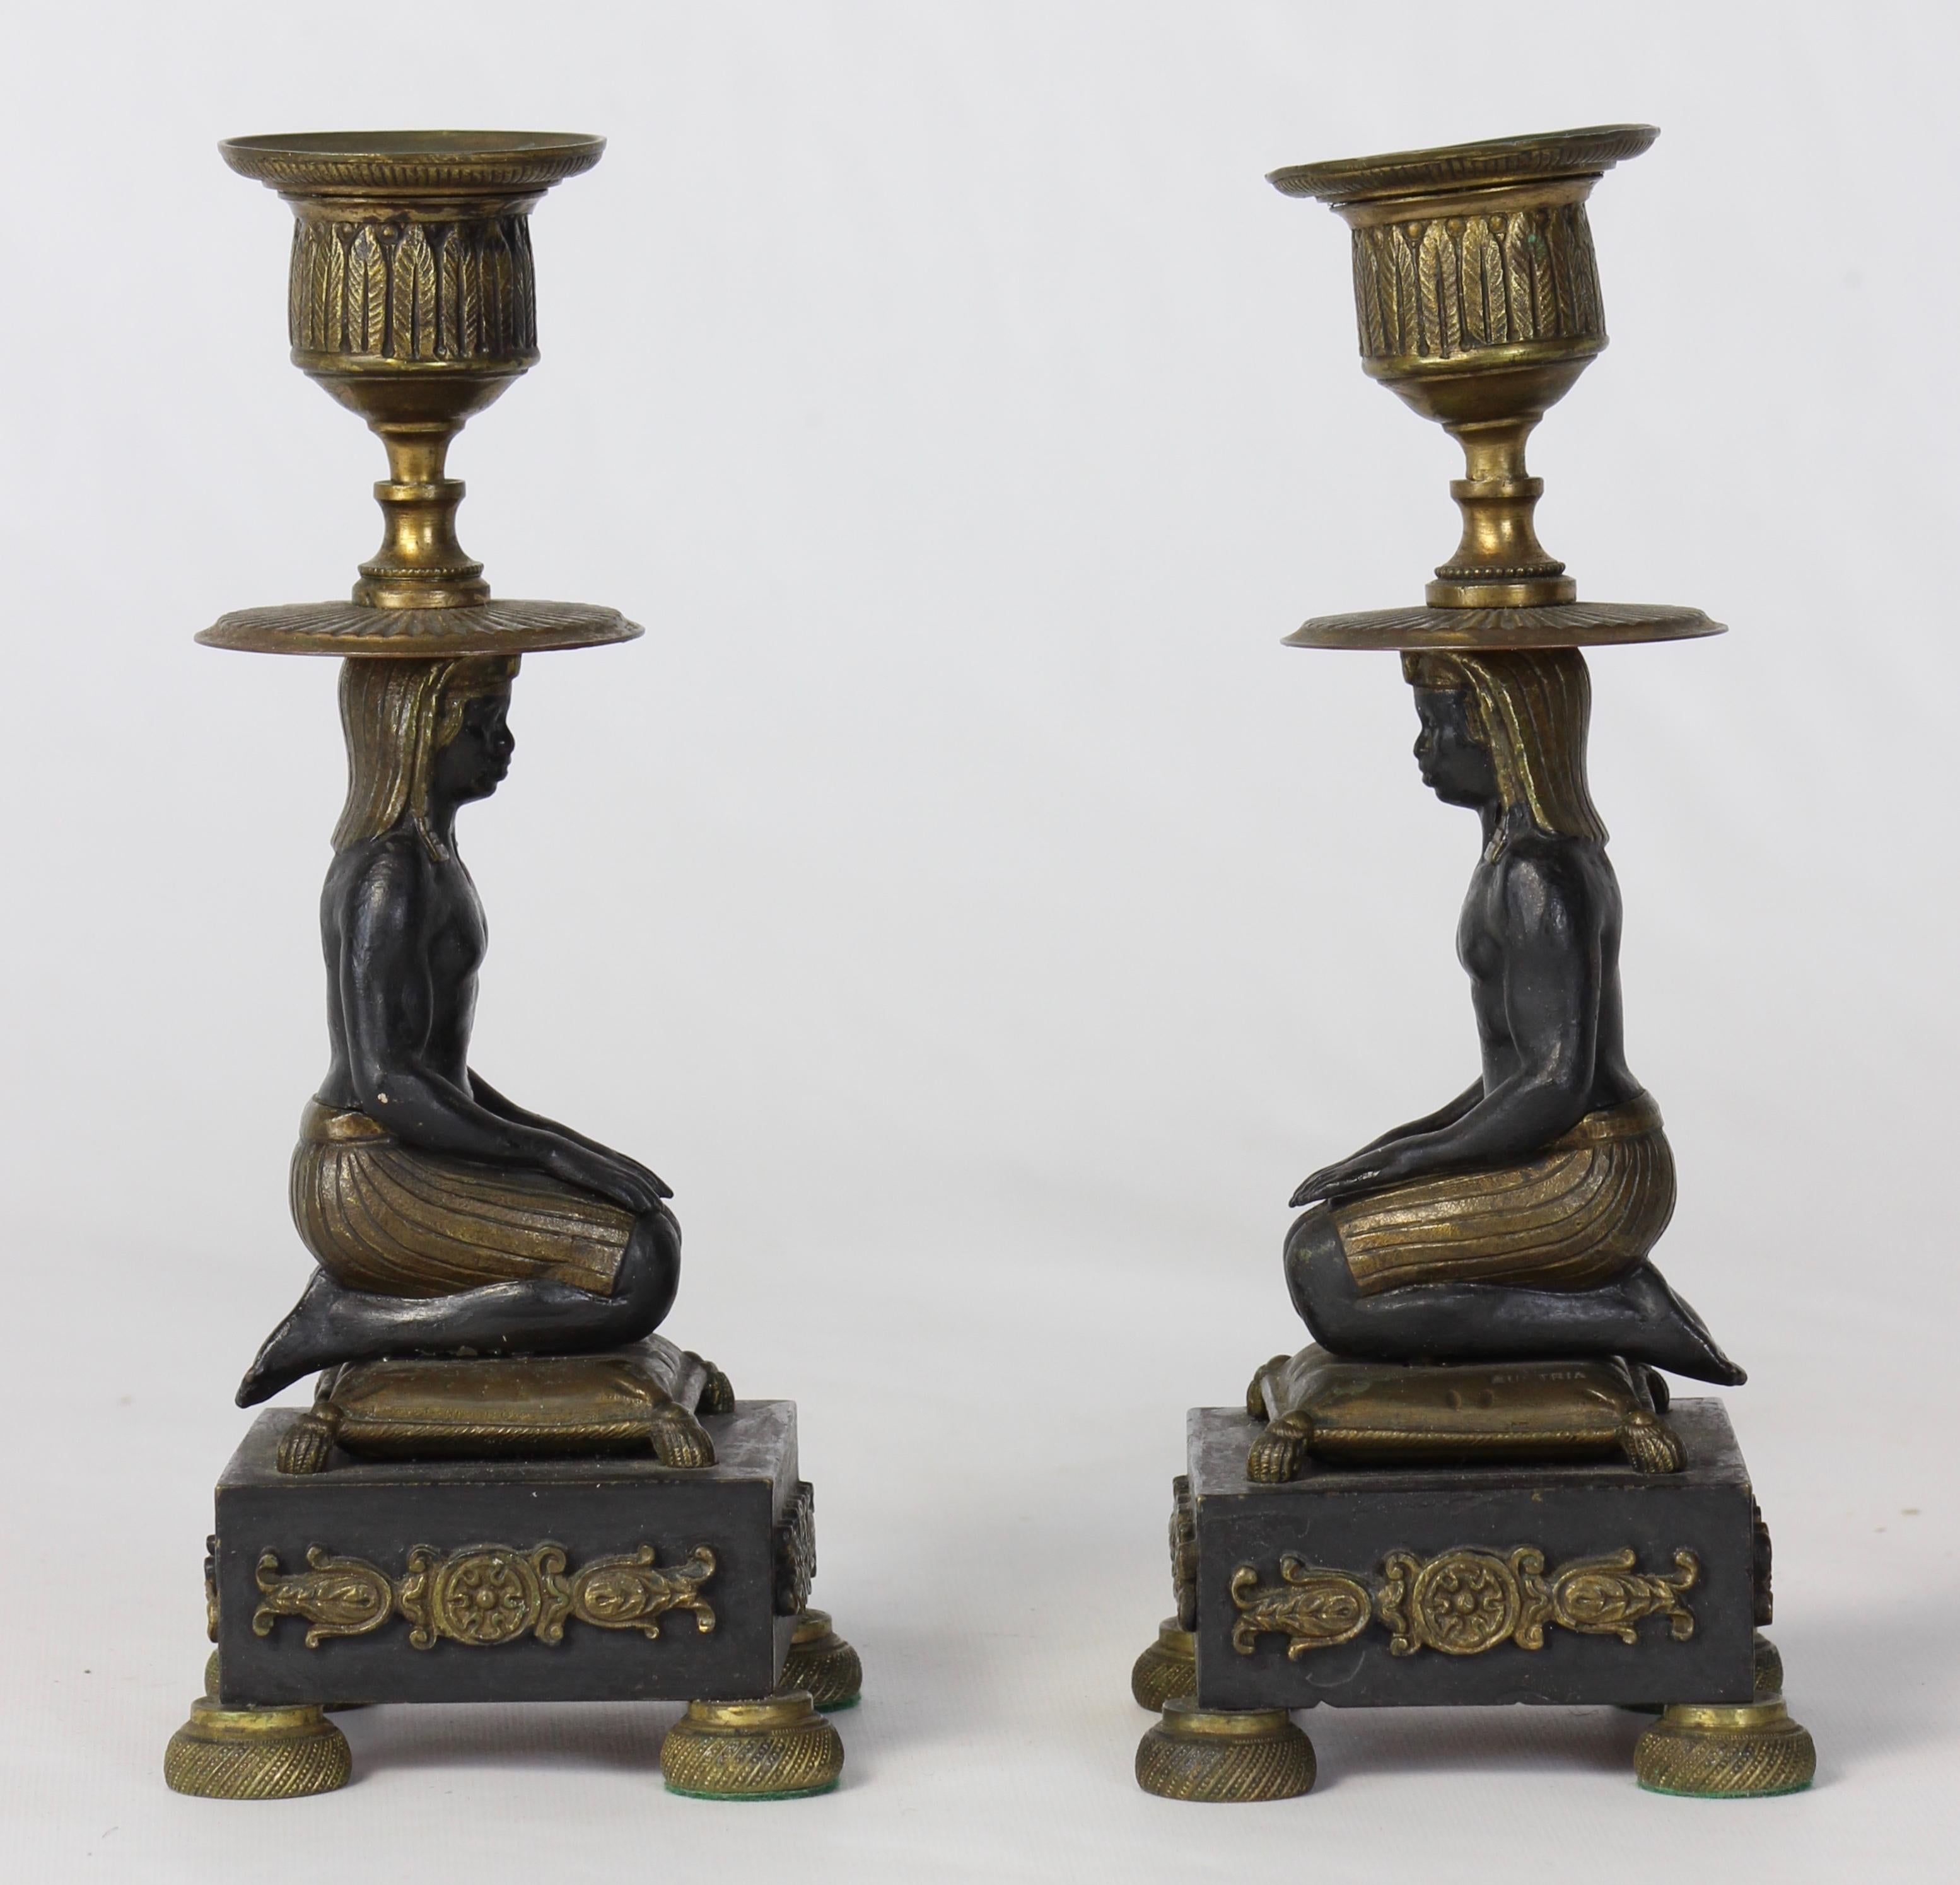 Gilt Pair of Early 19th Century Egyptian Revival Candlesticks